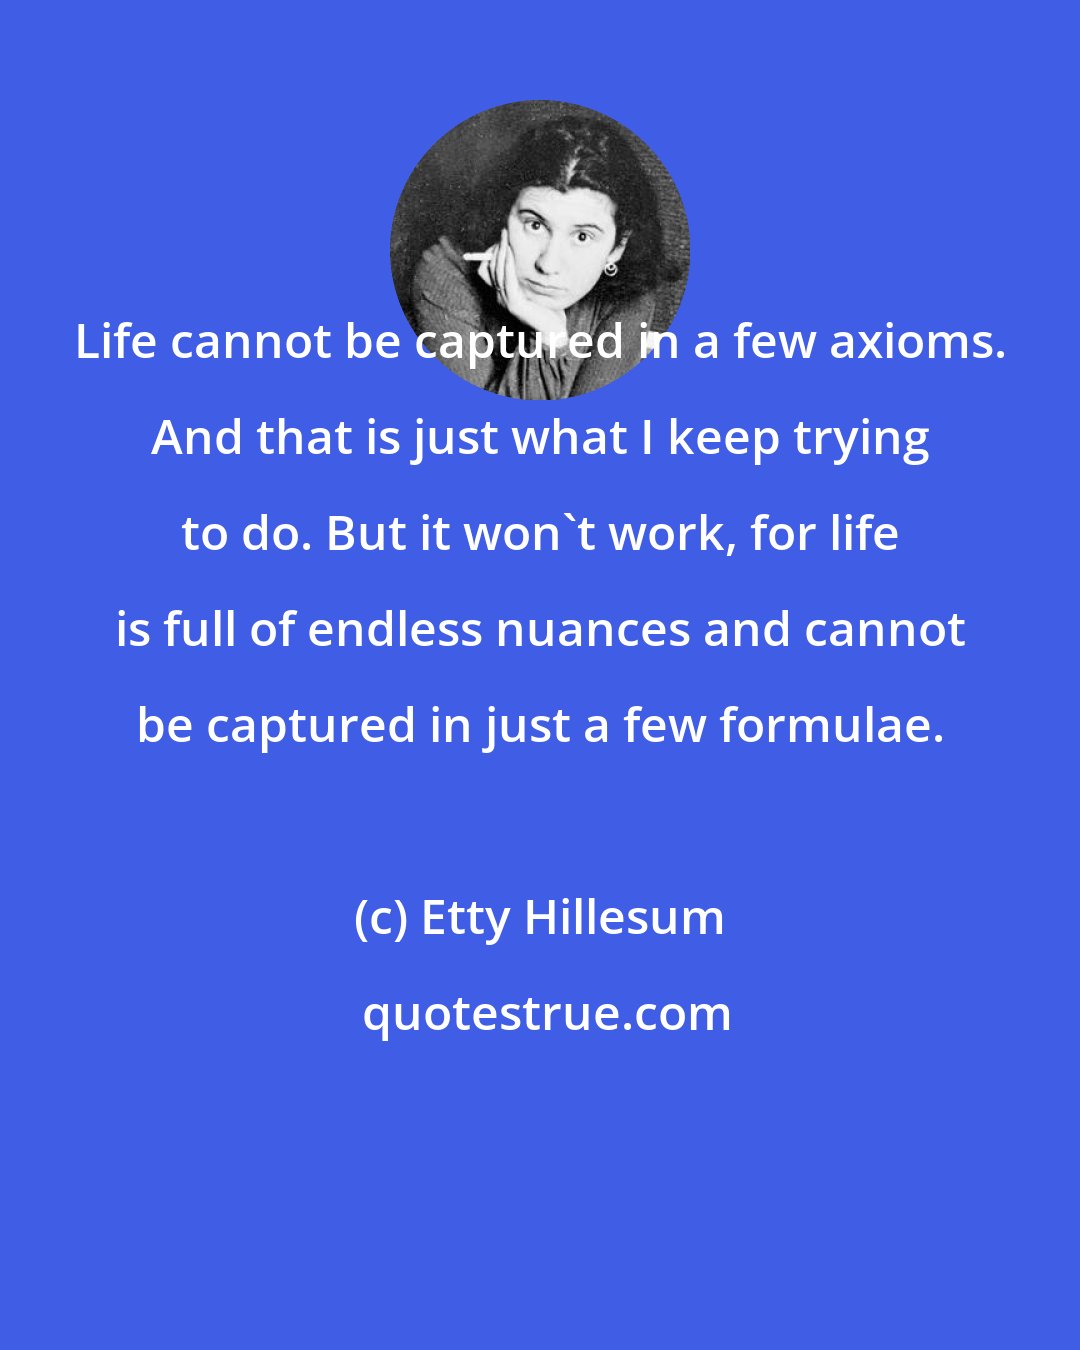 Etty Hillesum: Life cannot be captured in a few axioms. And that is just what I keep trying to do. But it won't work, for life is full of endless nuances and cannot be captured in just a few formulae.